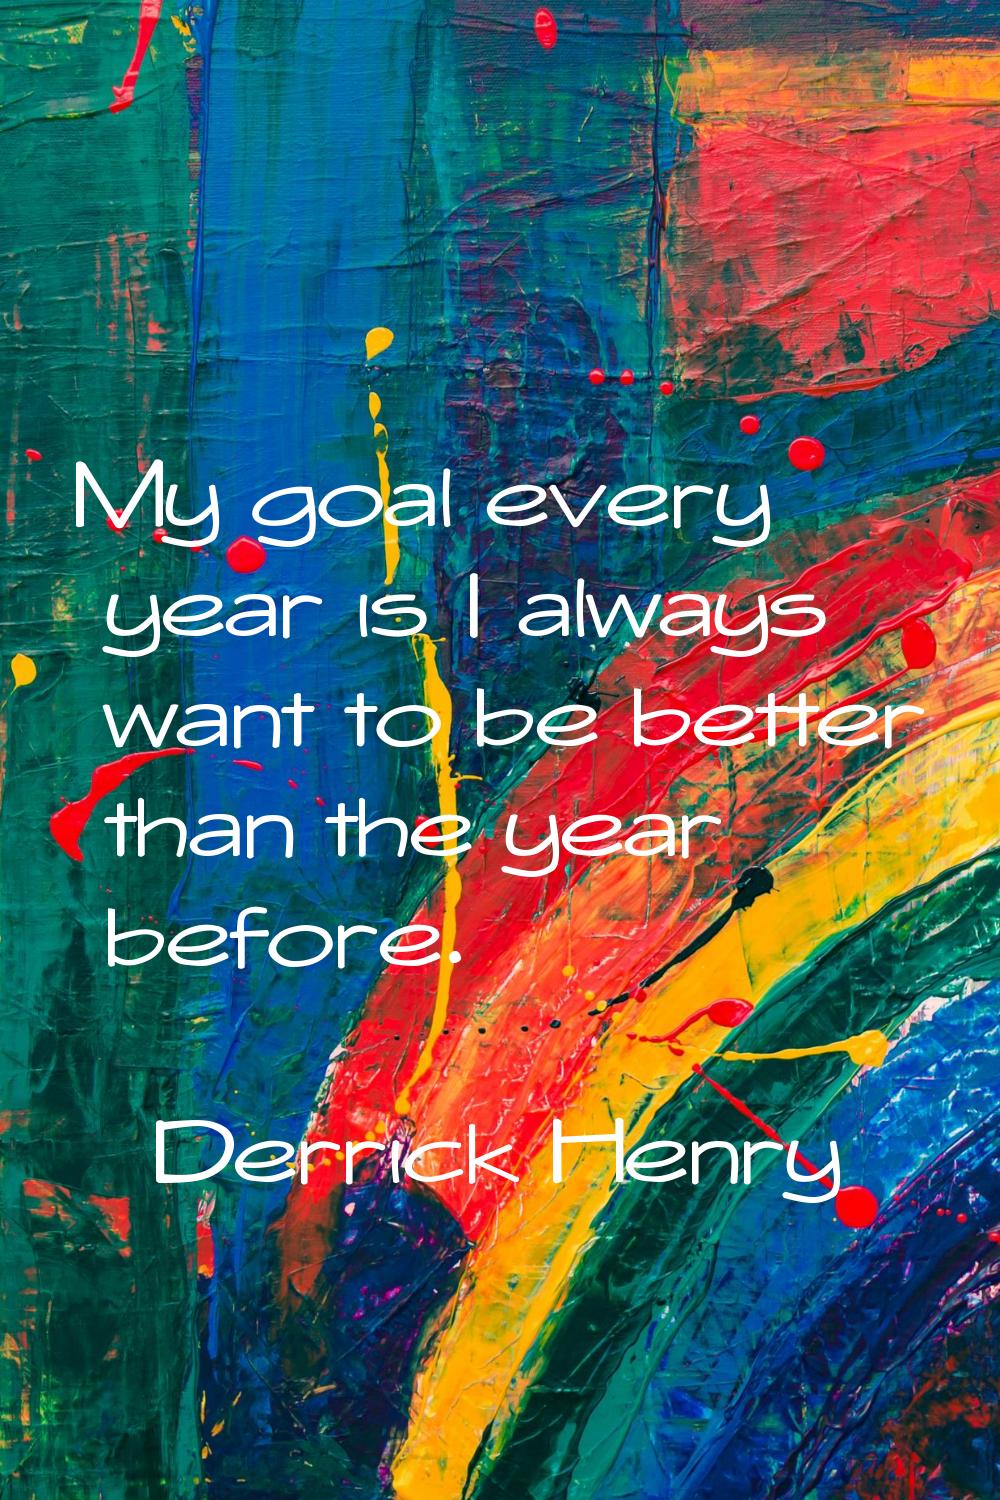 My goal every year is I always want to be better than the year before.